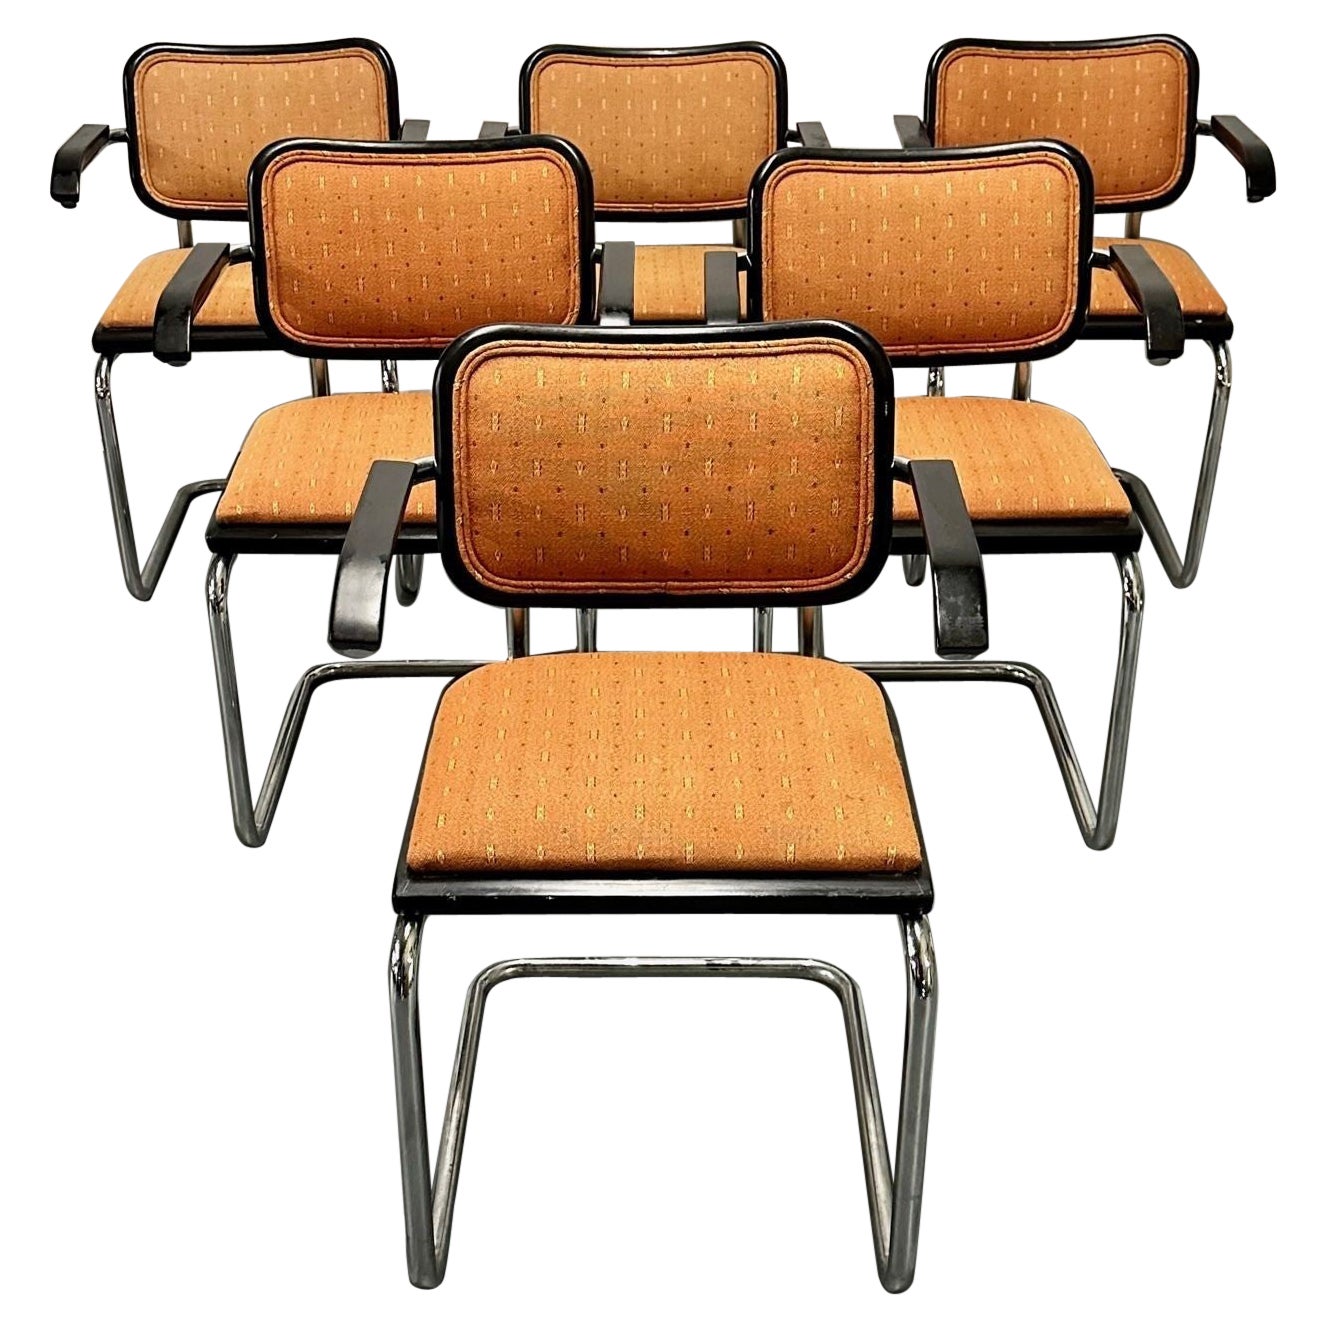 Six Mid-Century Modern Marcel Breuer for Knoll Cesca Chairs, Lacquer, 1960s